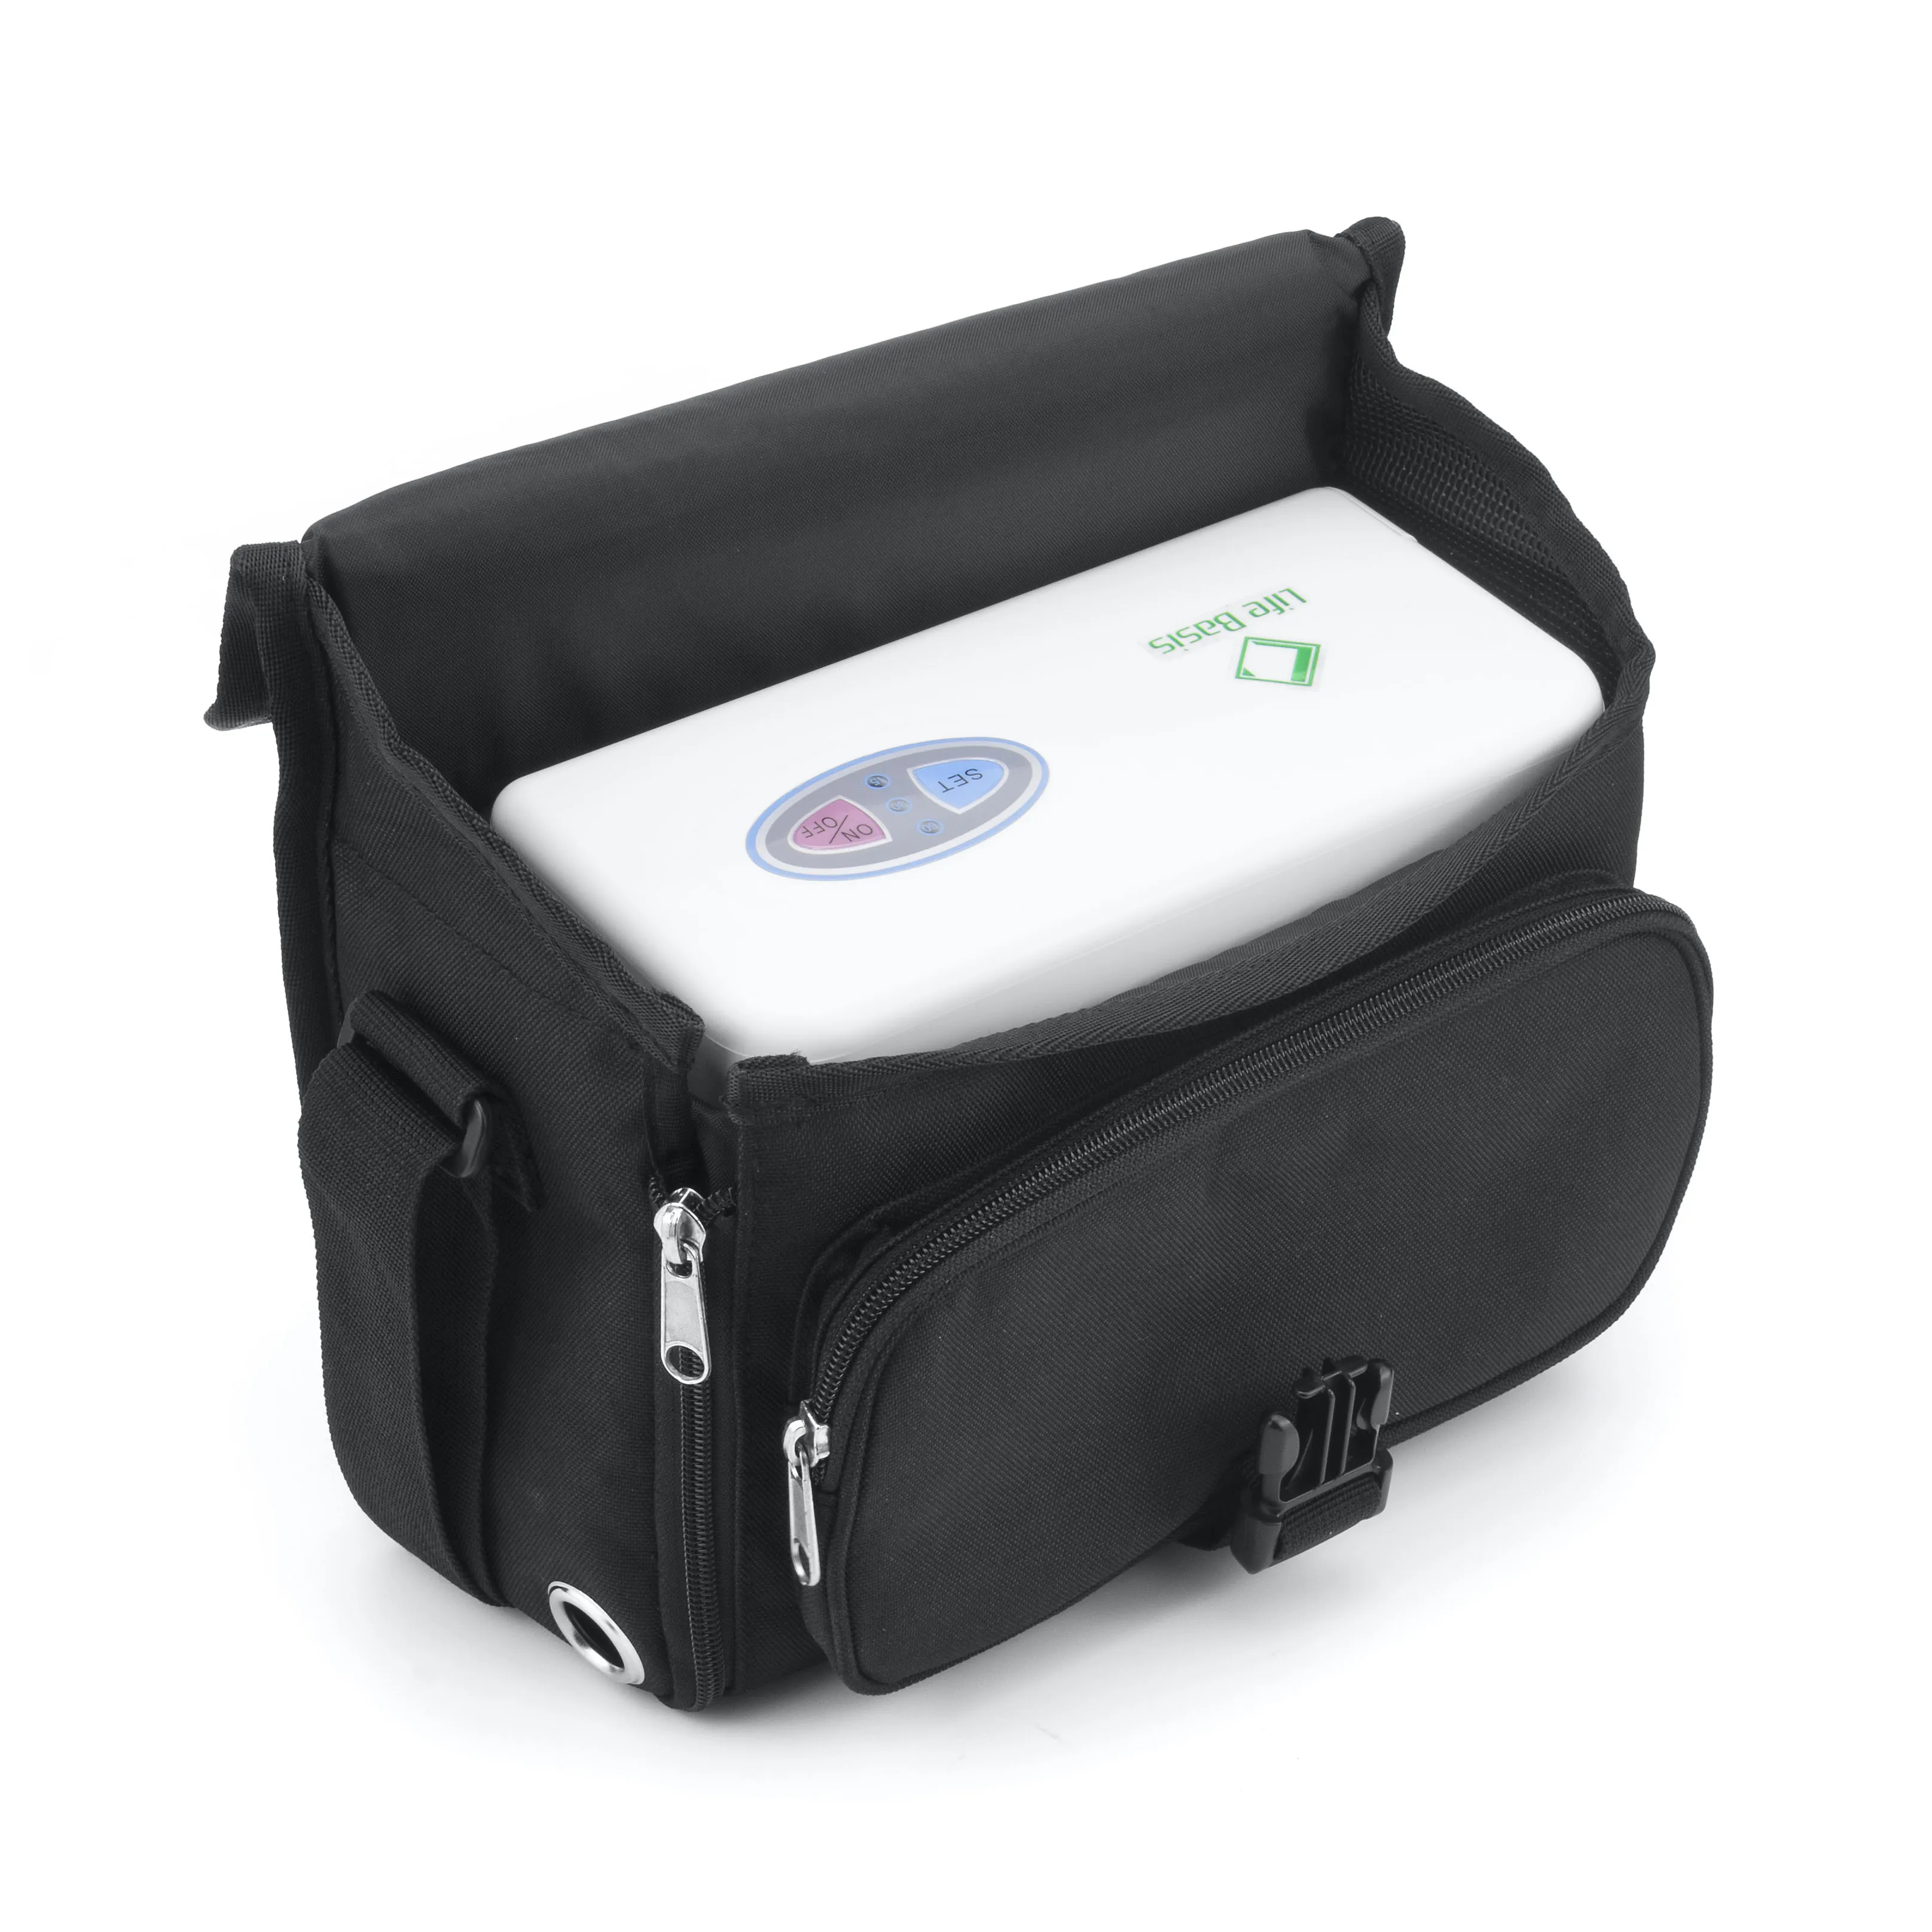  Oxygen Concentrator